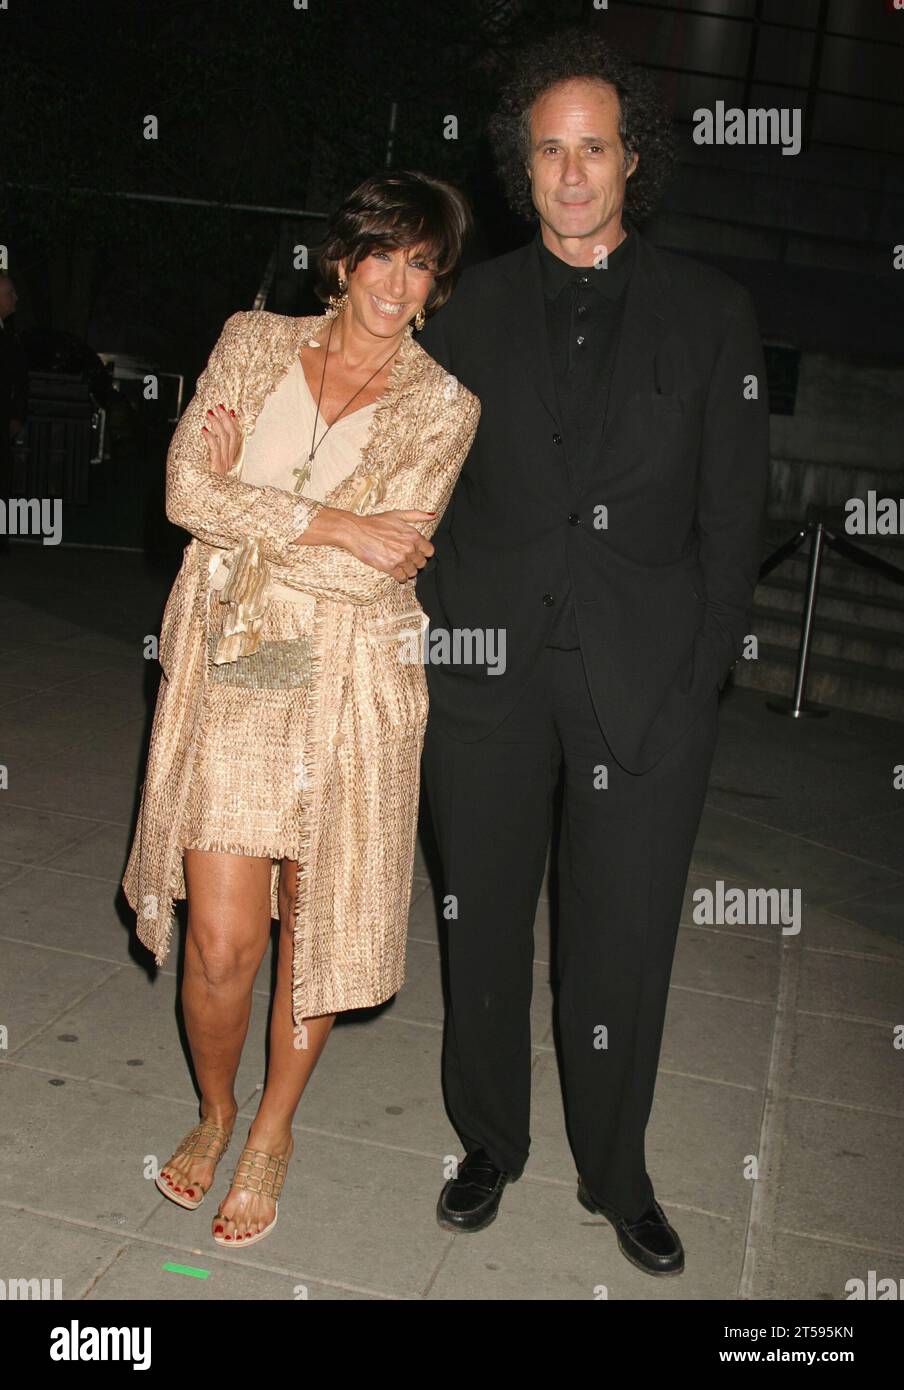 Donna Karan and Richard Baskin arriving at the Vanity Fair Party to celebrate the 3rd Annual Tribeca Film Festival at The State Supreme Courthouse in New York City on May 4, 2004.  Photo Credit: Henry McGee/MediaPunch Stock Photo